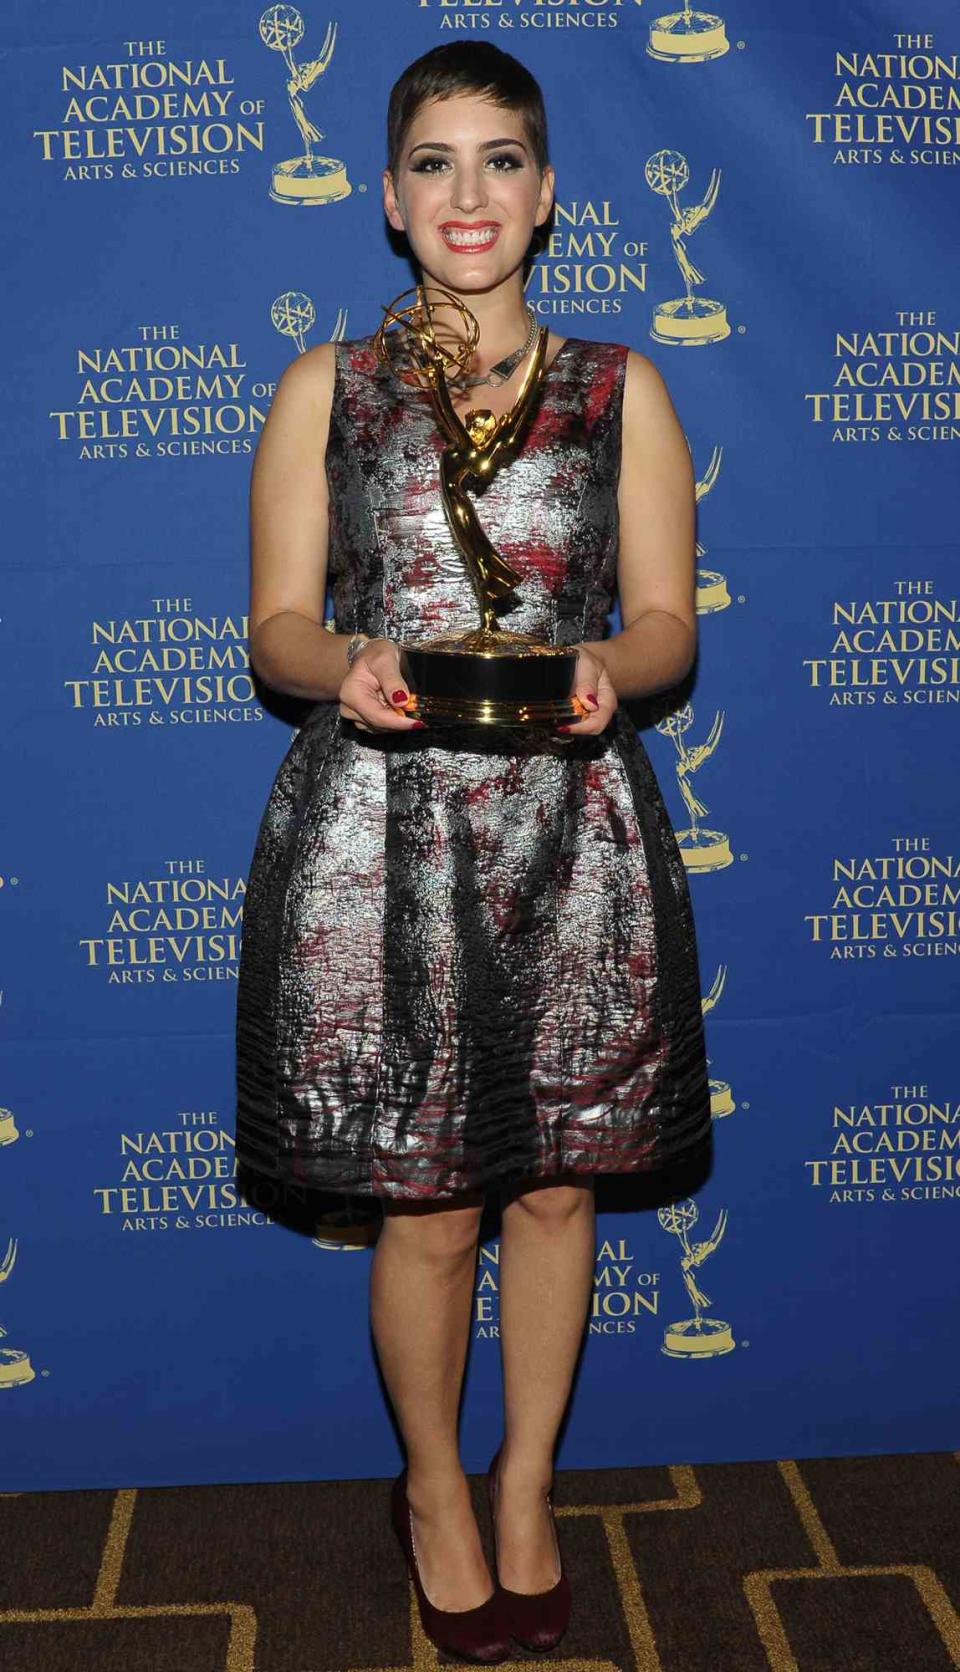 Suleika Jaouad attends the 34th annual News & Documentary Emmy awards at Frederick P. Rose Hall, Jazz at Lincoln Center on October 1, 2013 in New York City